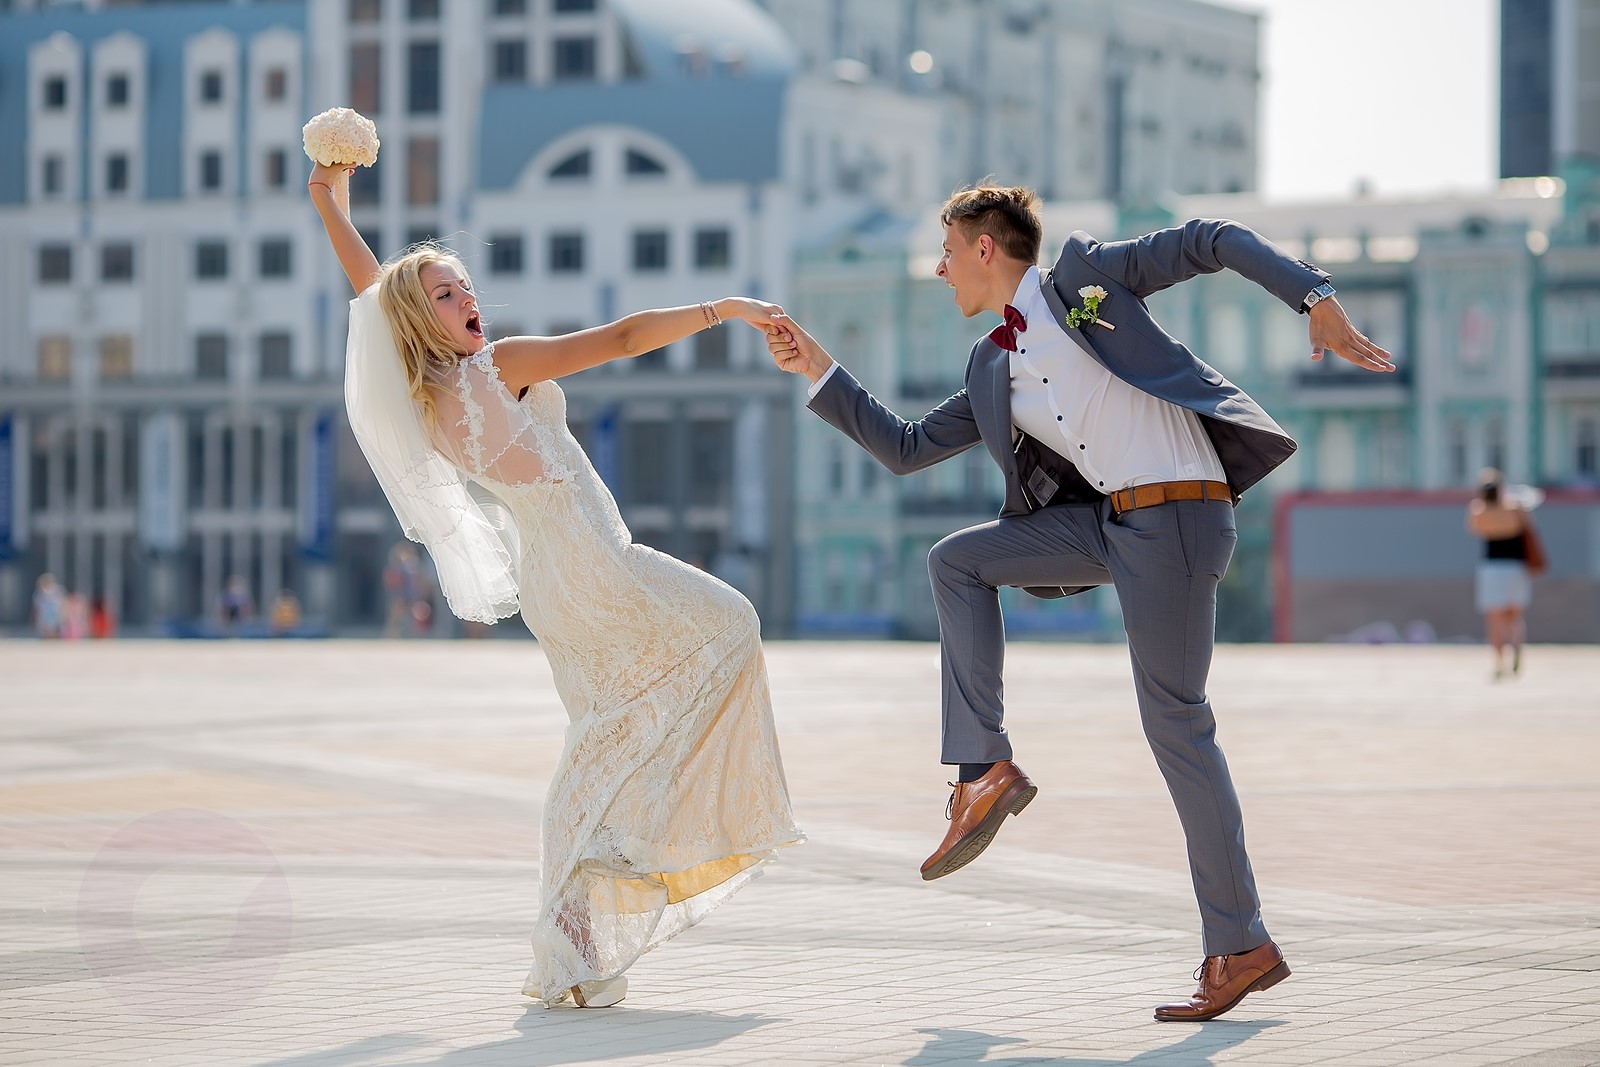 4 Tips on How You Can Be Prepared for Your First Dance